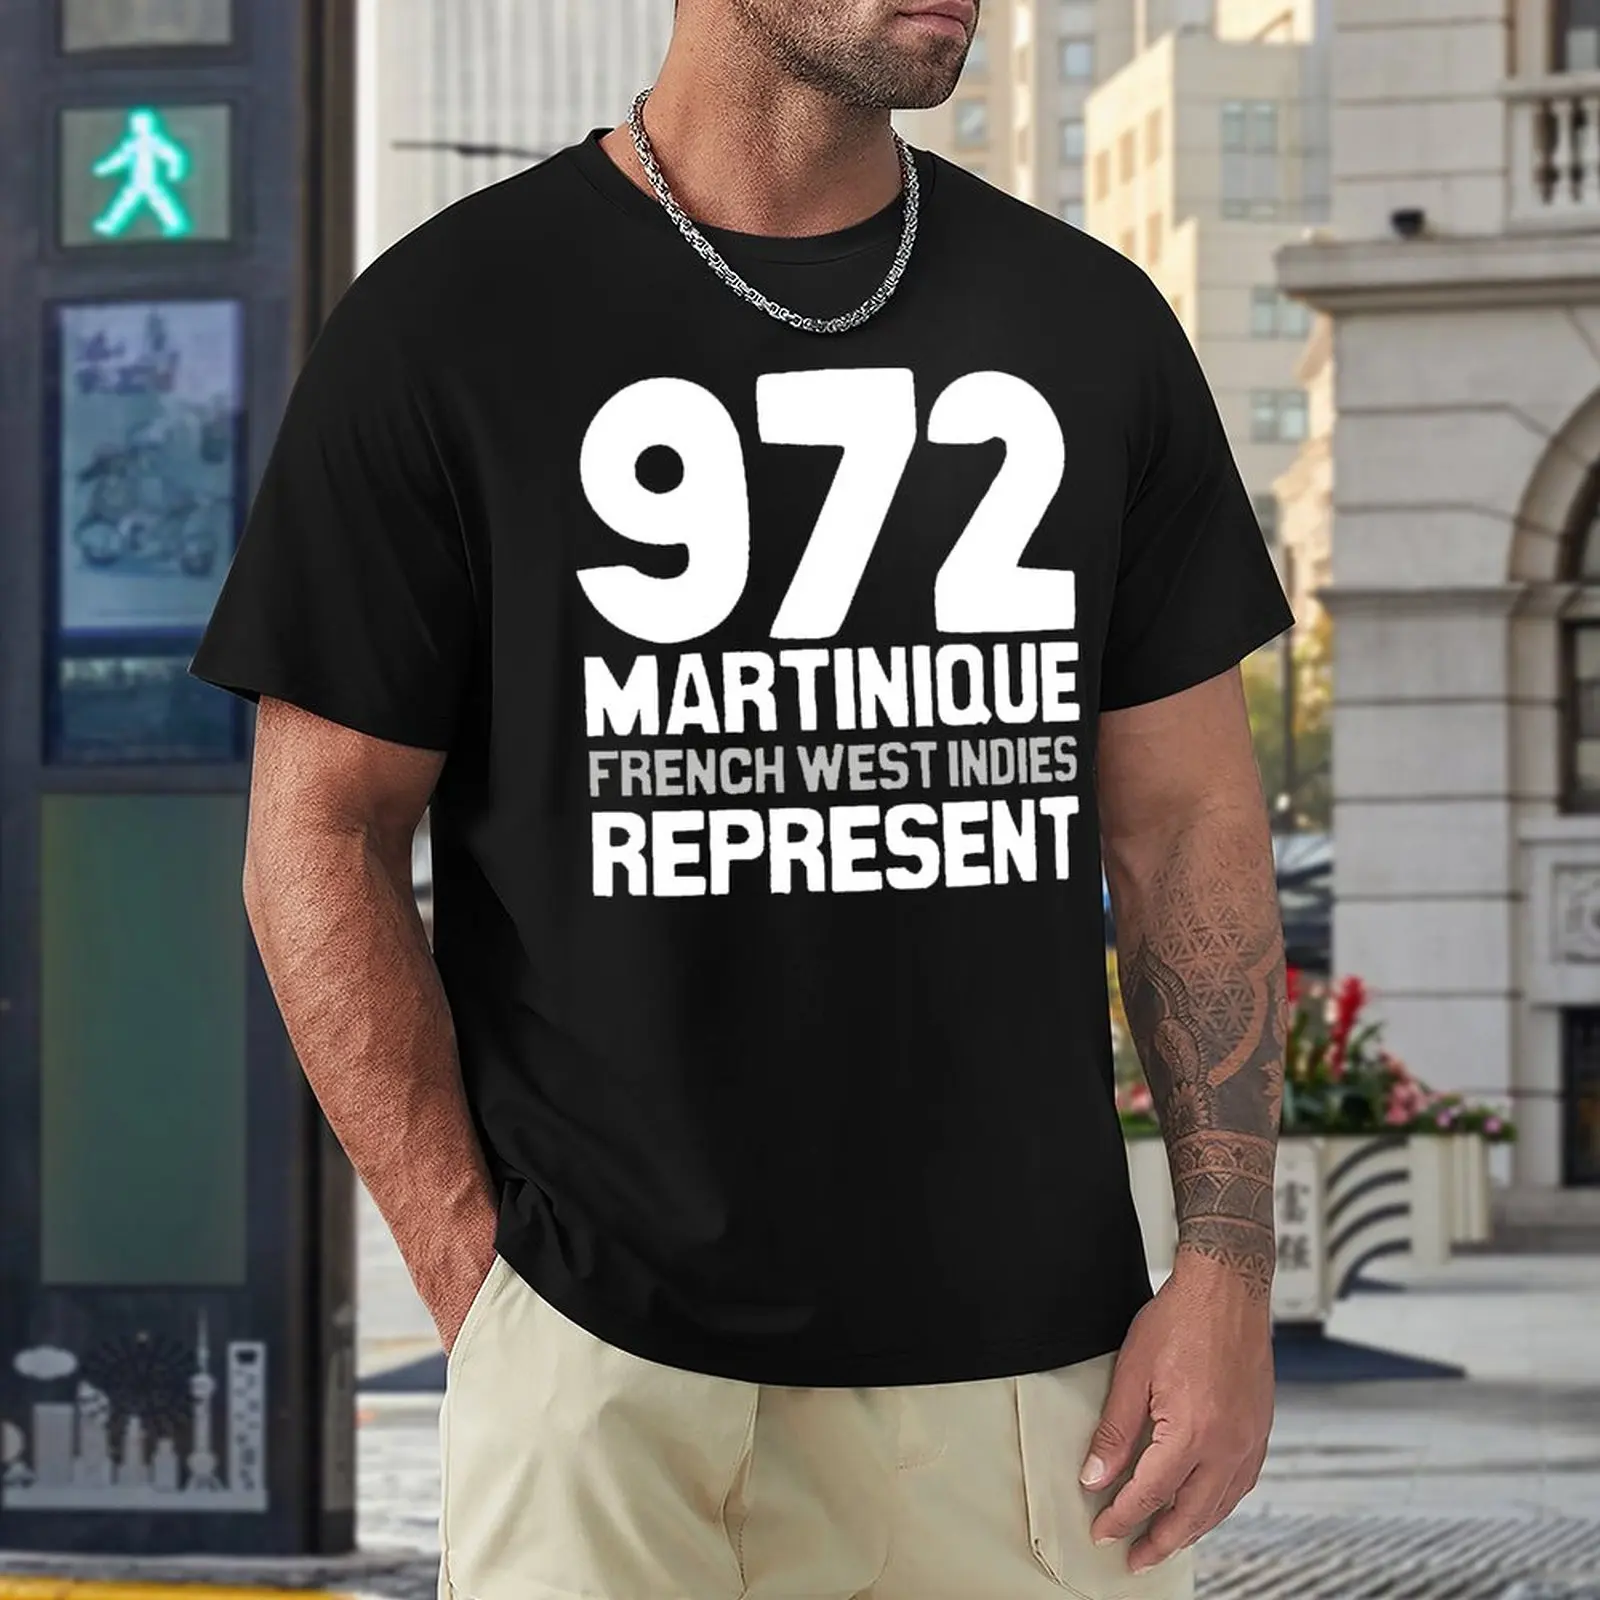 

972 Martinique, FWI. Representes Essential Funny Top Tee Vintage Activity Competition Eur Size